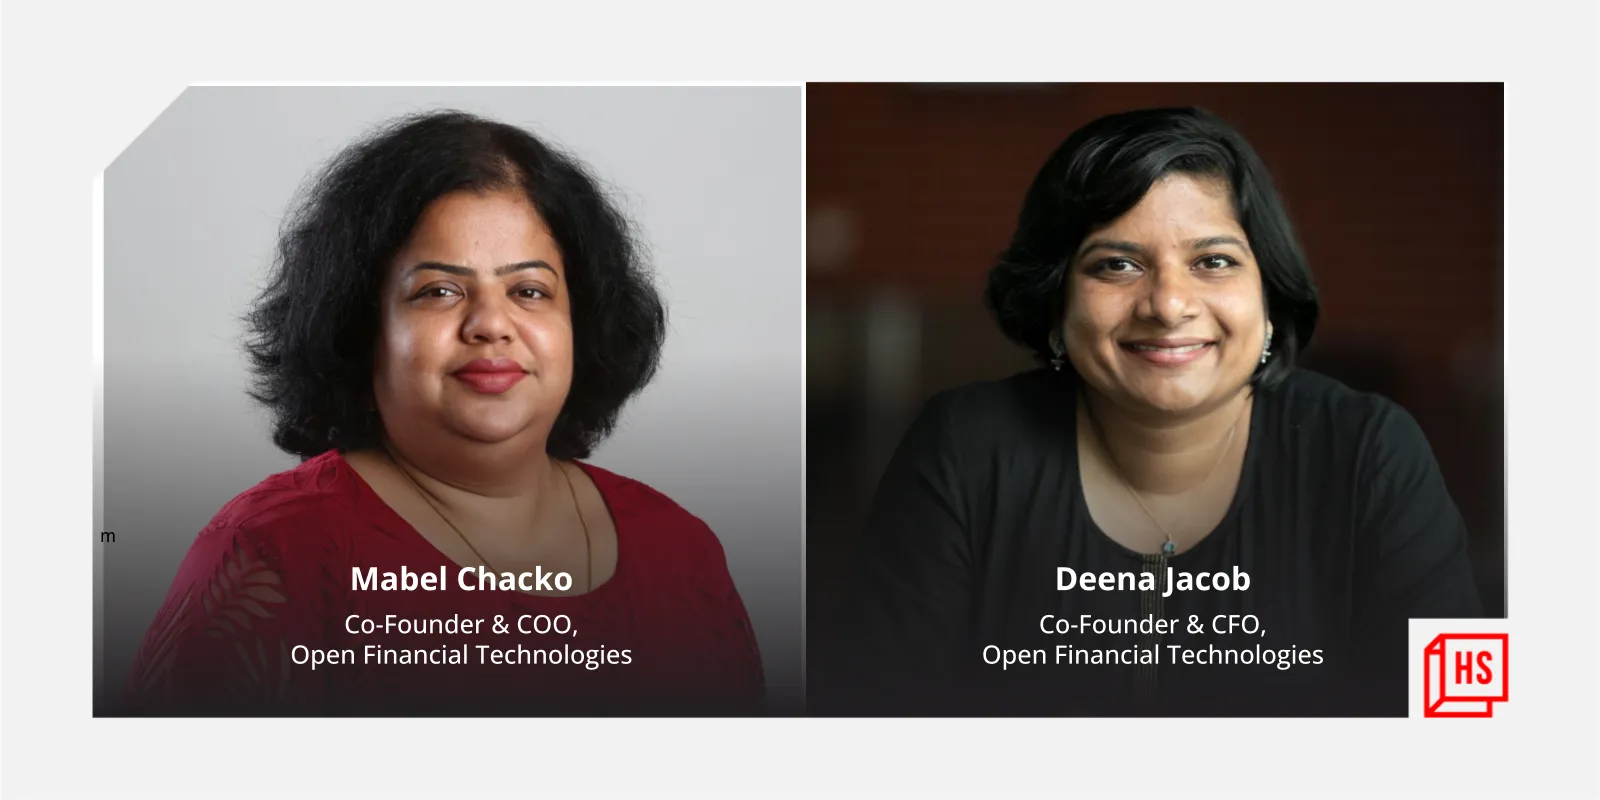 [HS Exclusive] Meet Mabel Chacko and Deena Jacob, the women co-founders behind India’s 100th unicorn, Open